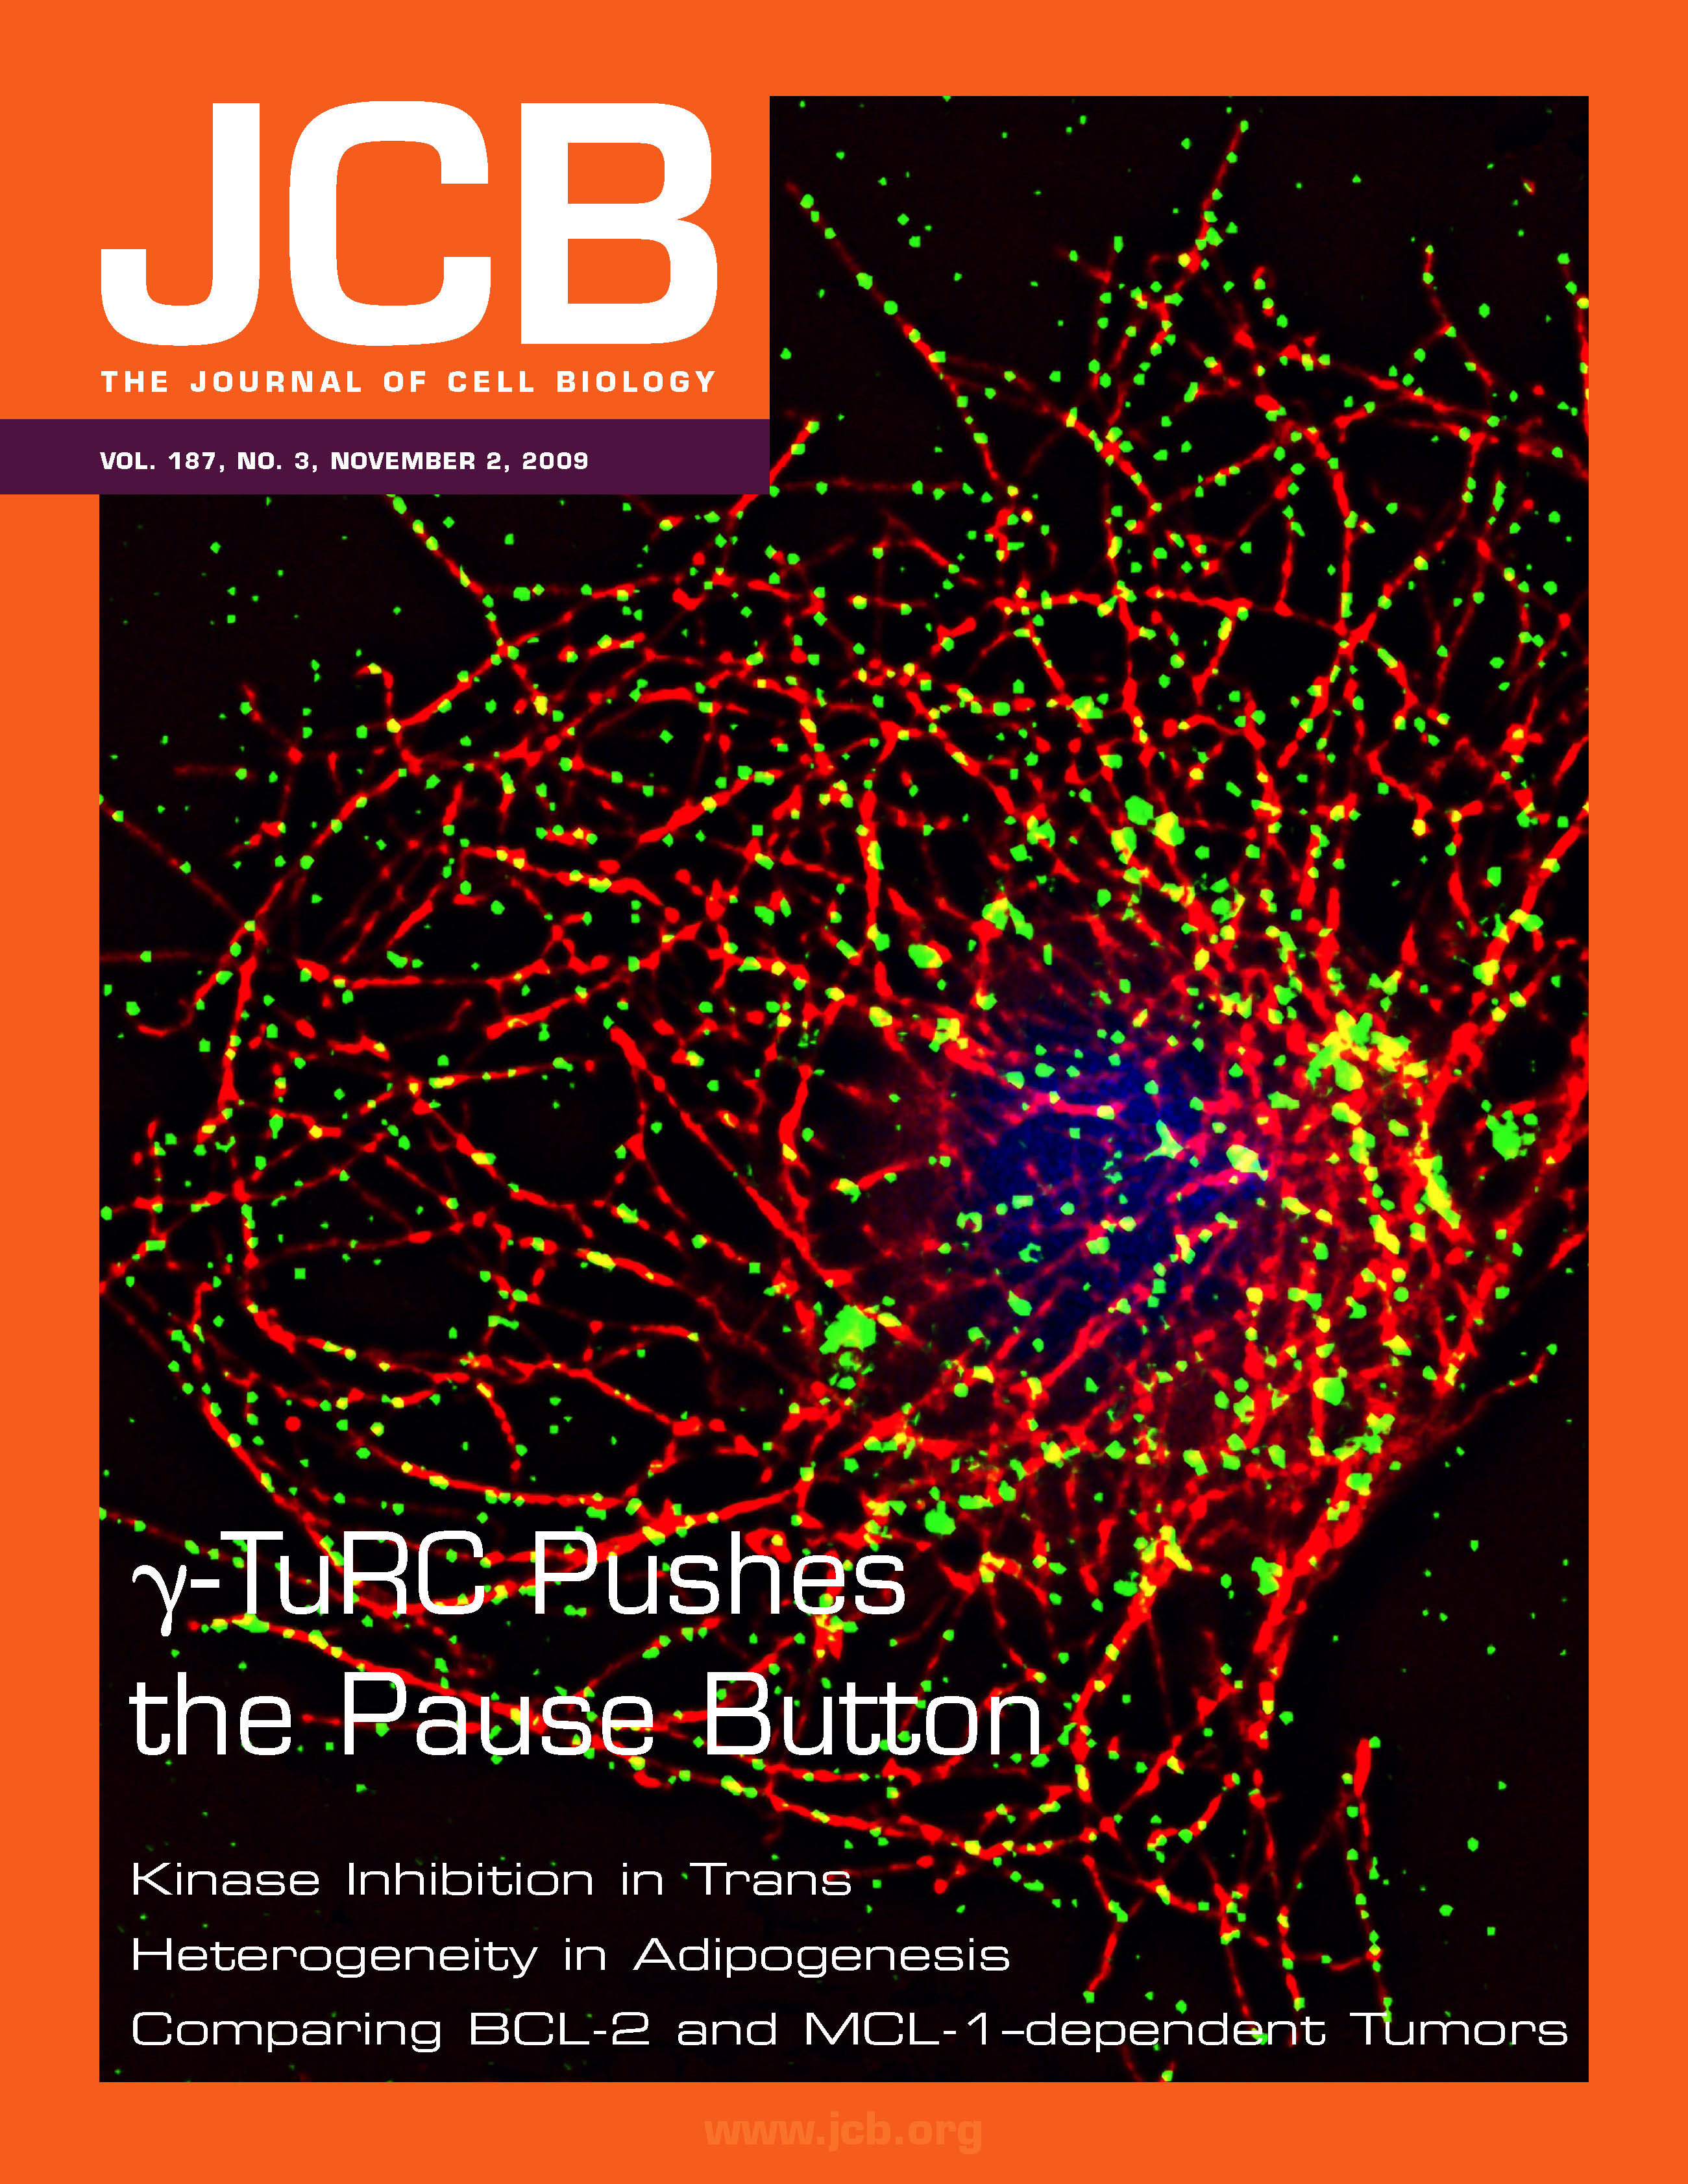 An issue of the Journal of Cell Biology